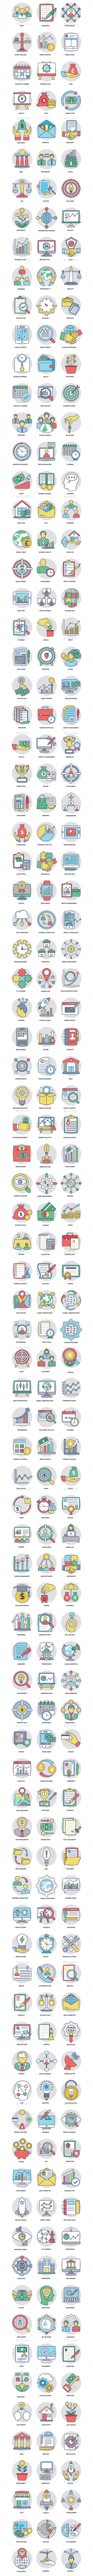 266 Flat Business Icons